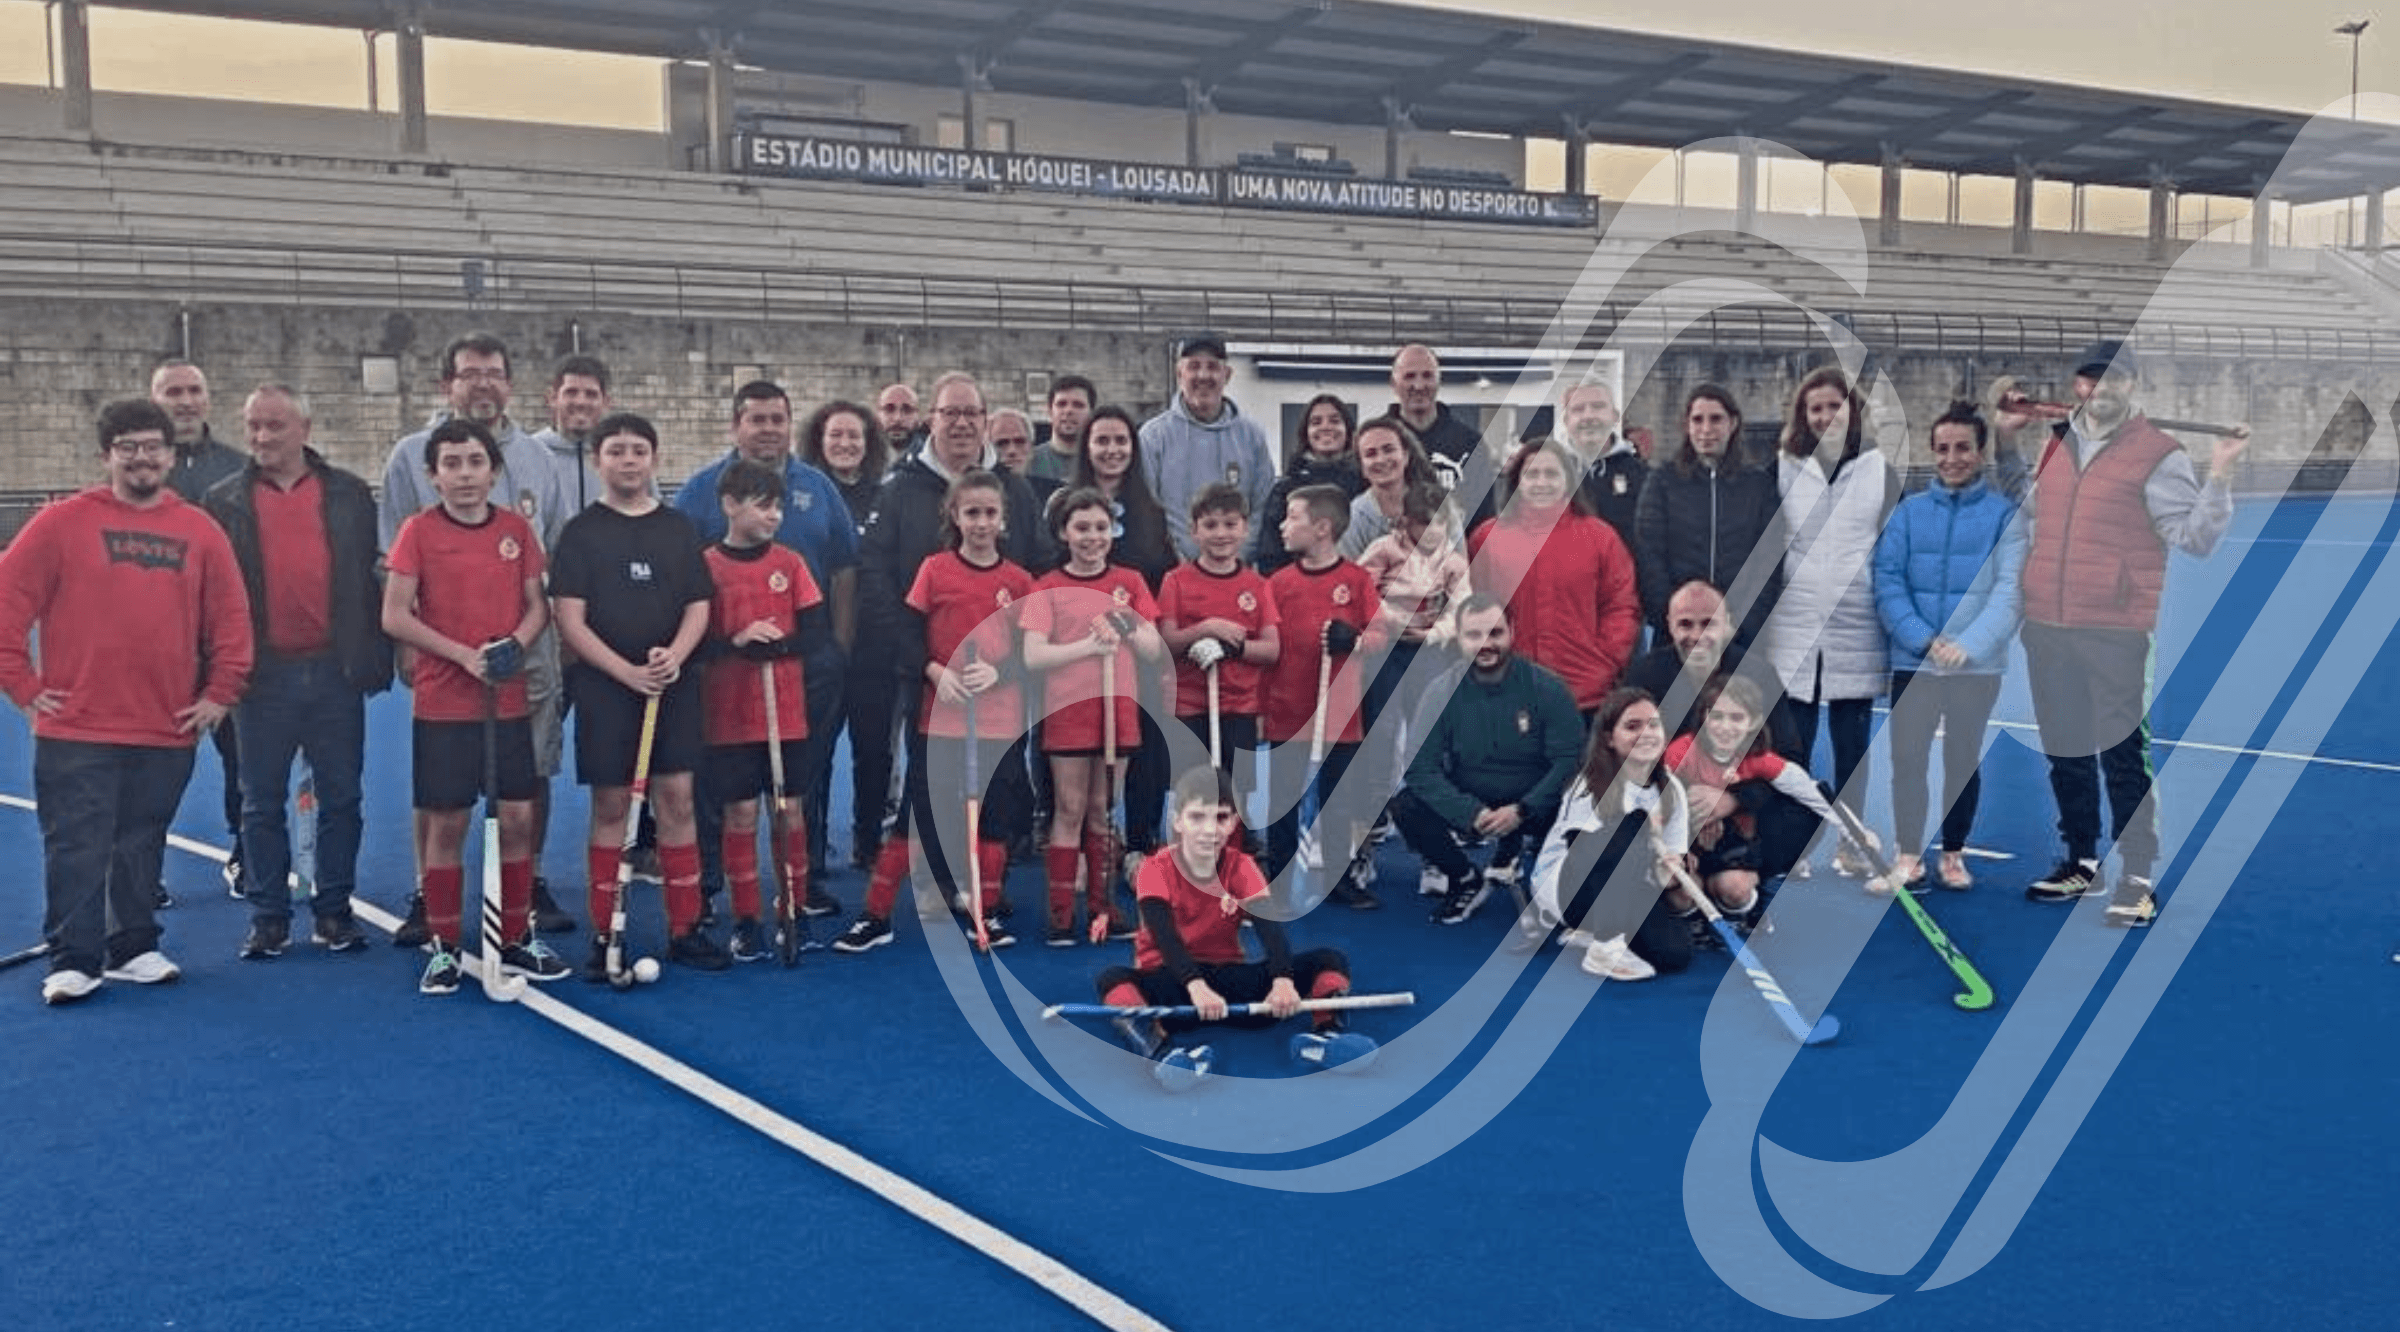 Williams leads masterclass in Portugal with EuroHockey and FIH support